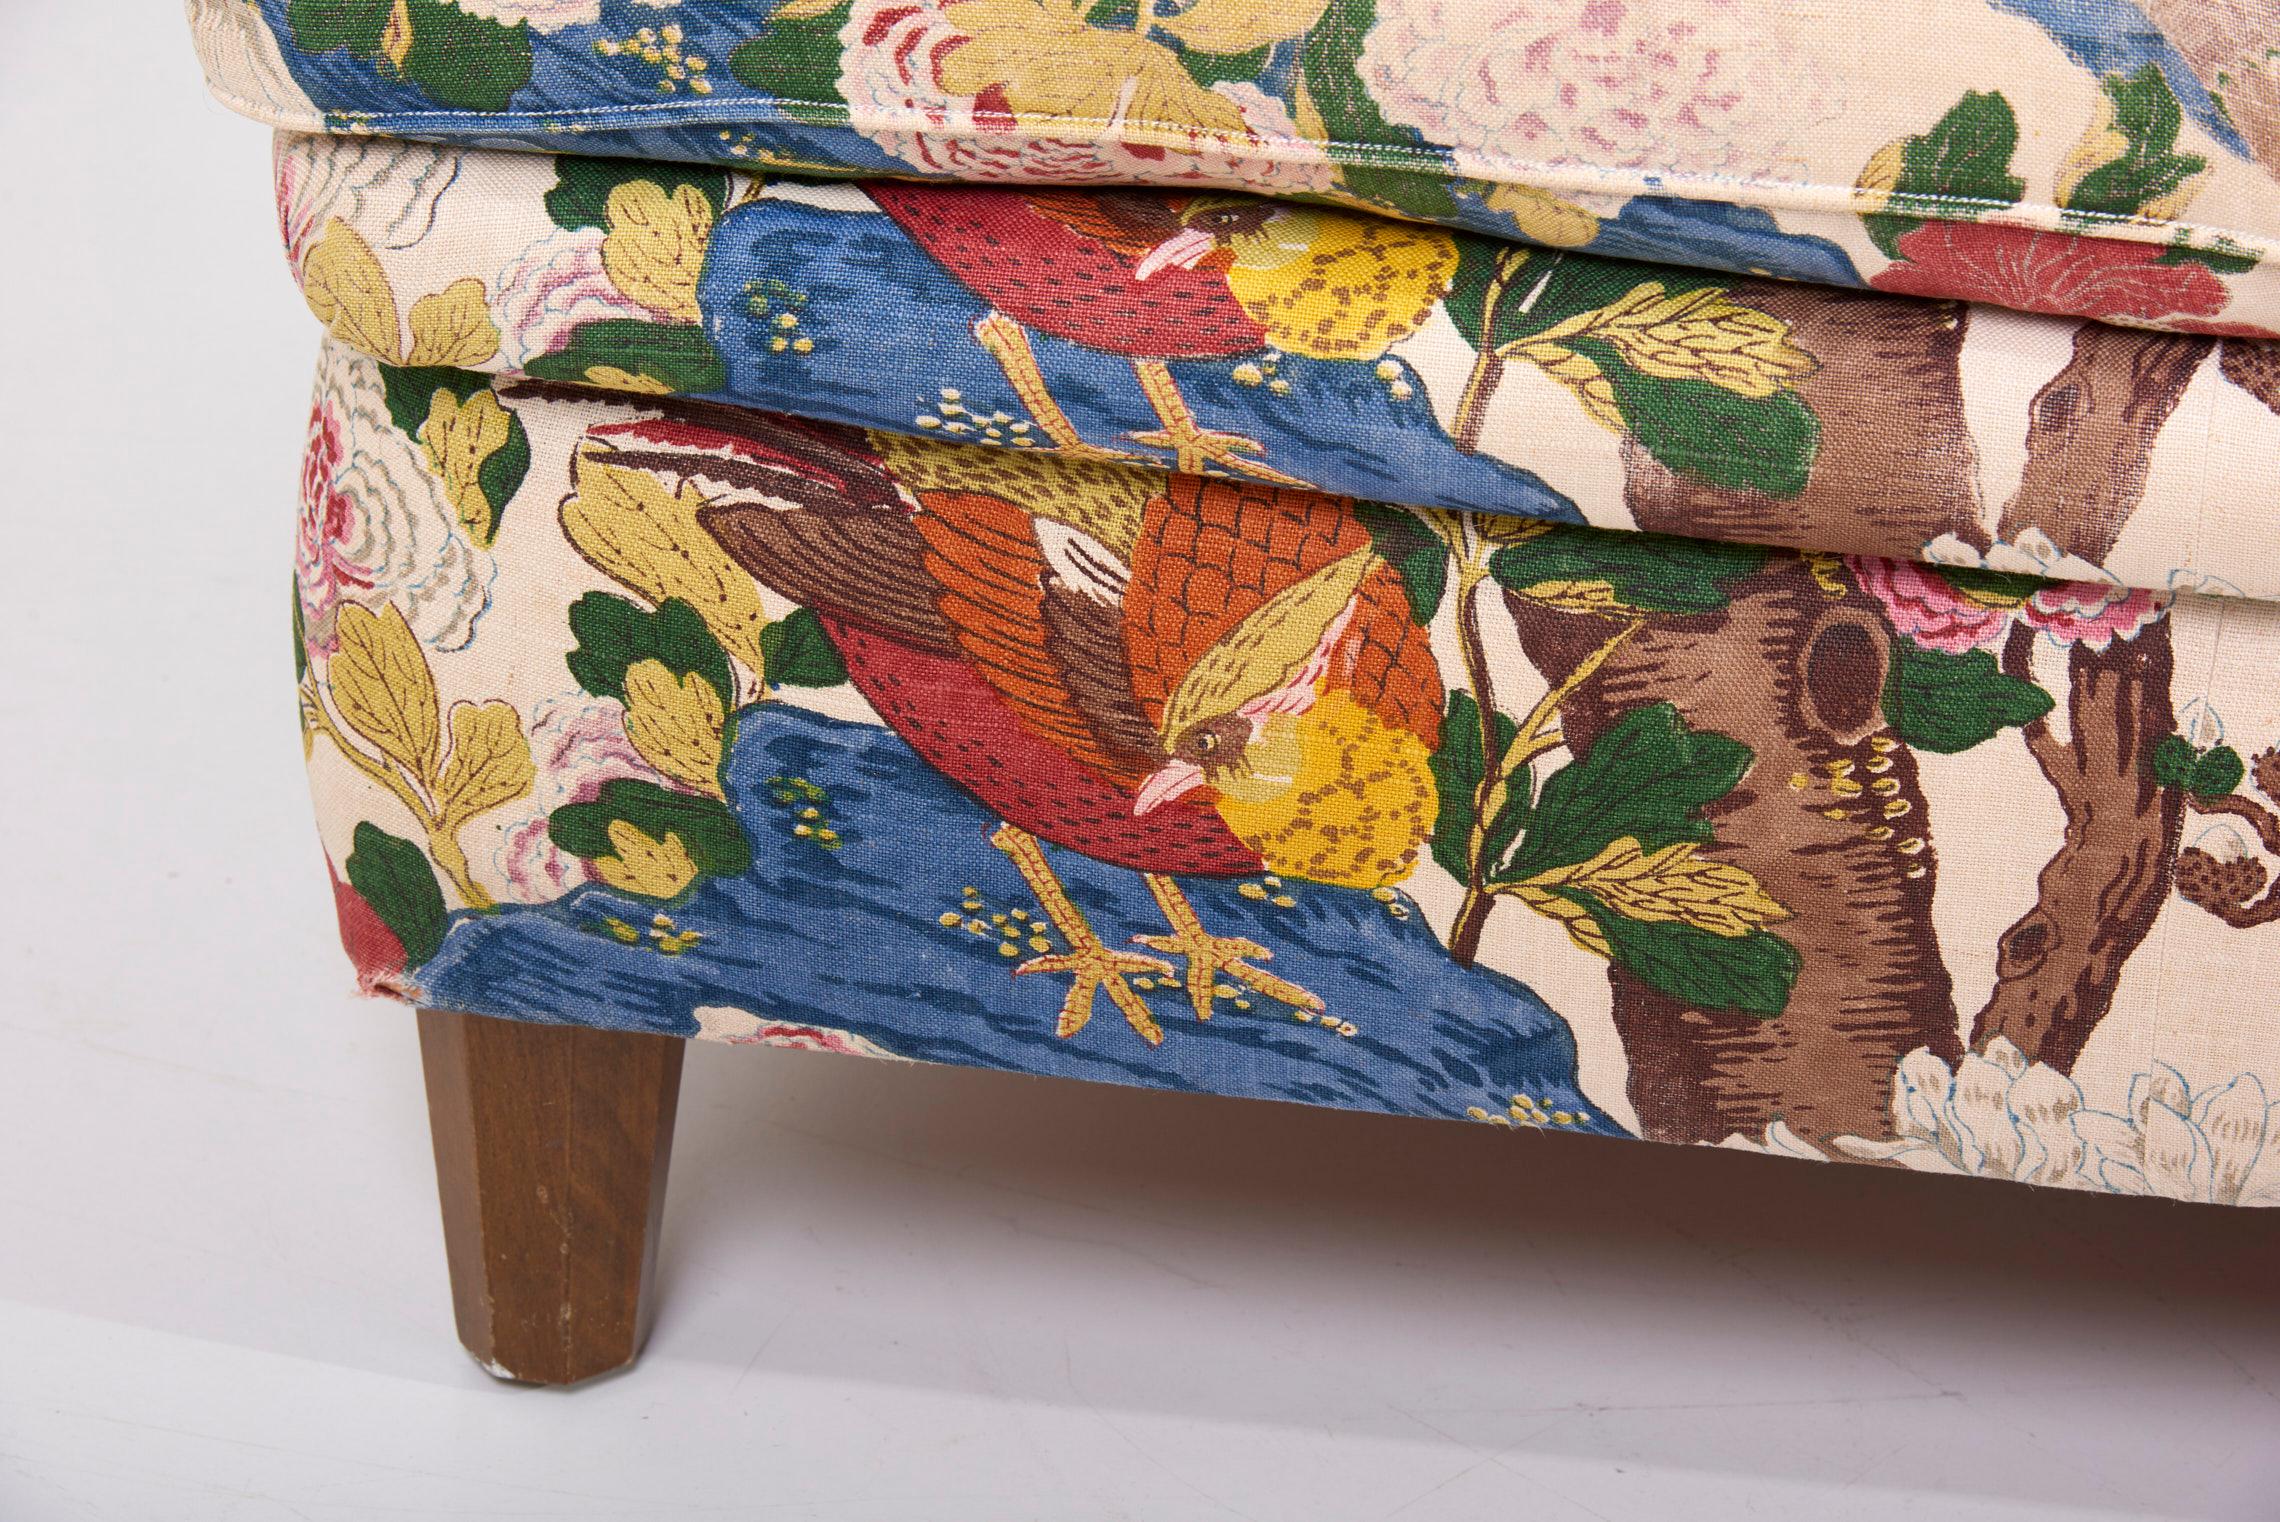 Mid-Century Modern 4-Seat Sofa with Floral Fabric by Josef Frank for Svenskt Tenn, 1950s